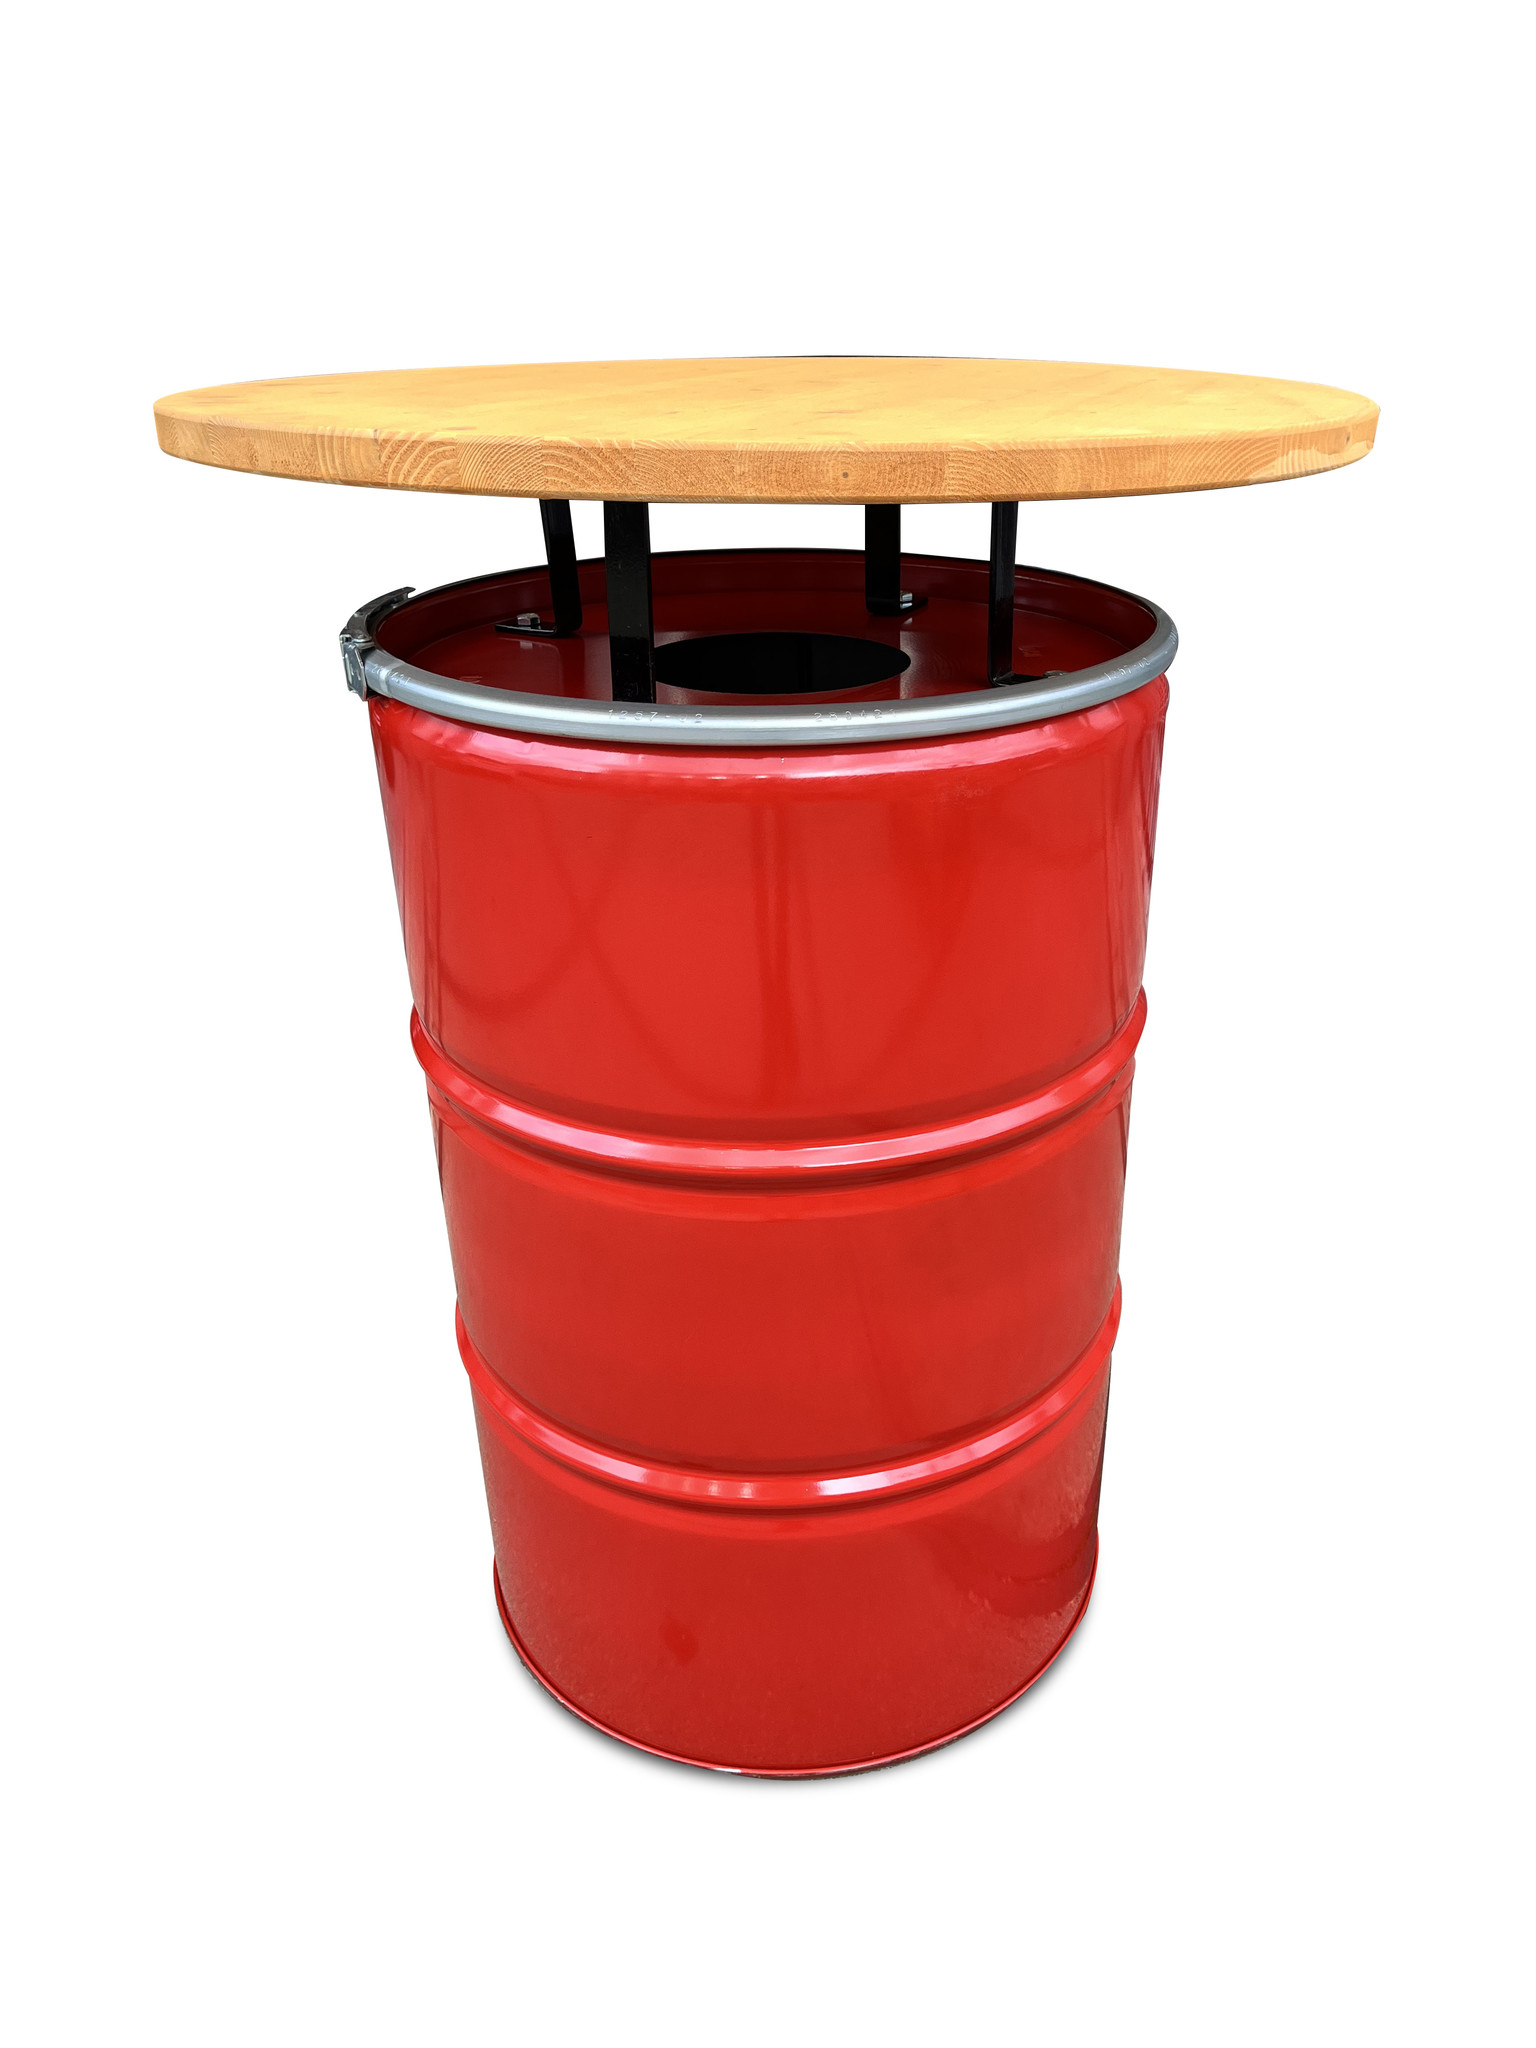 The Binbin Multifunctional Standing table/trash can 200 L, 2 in 1